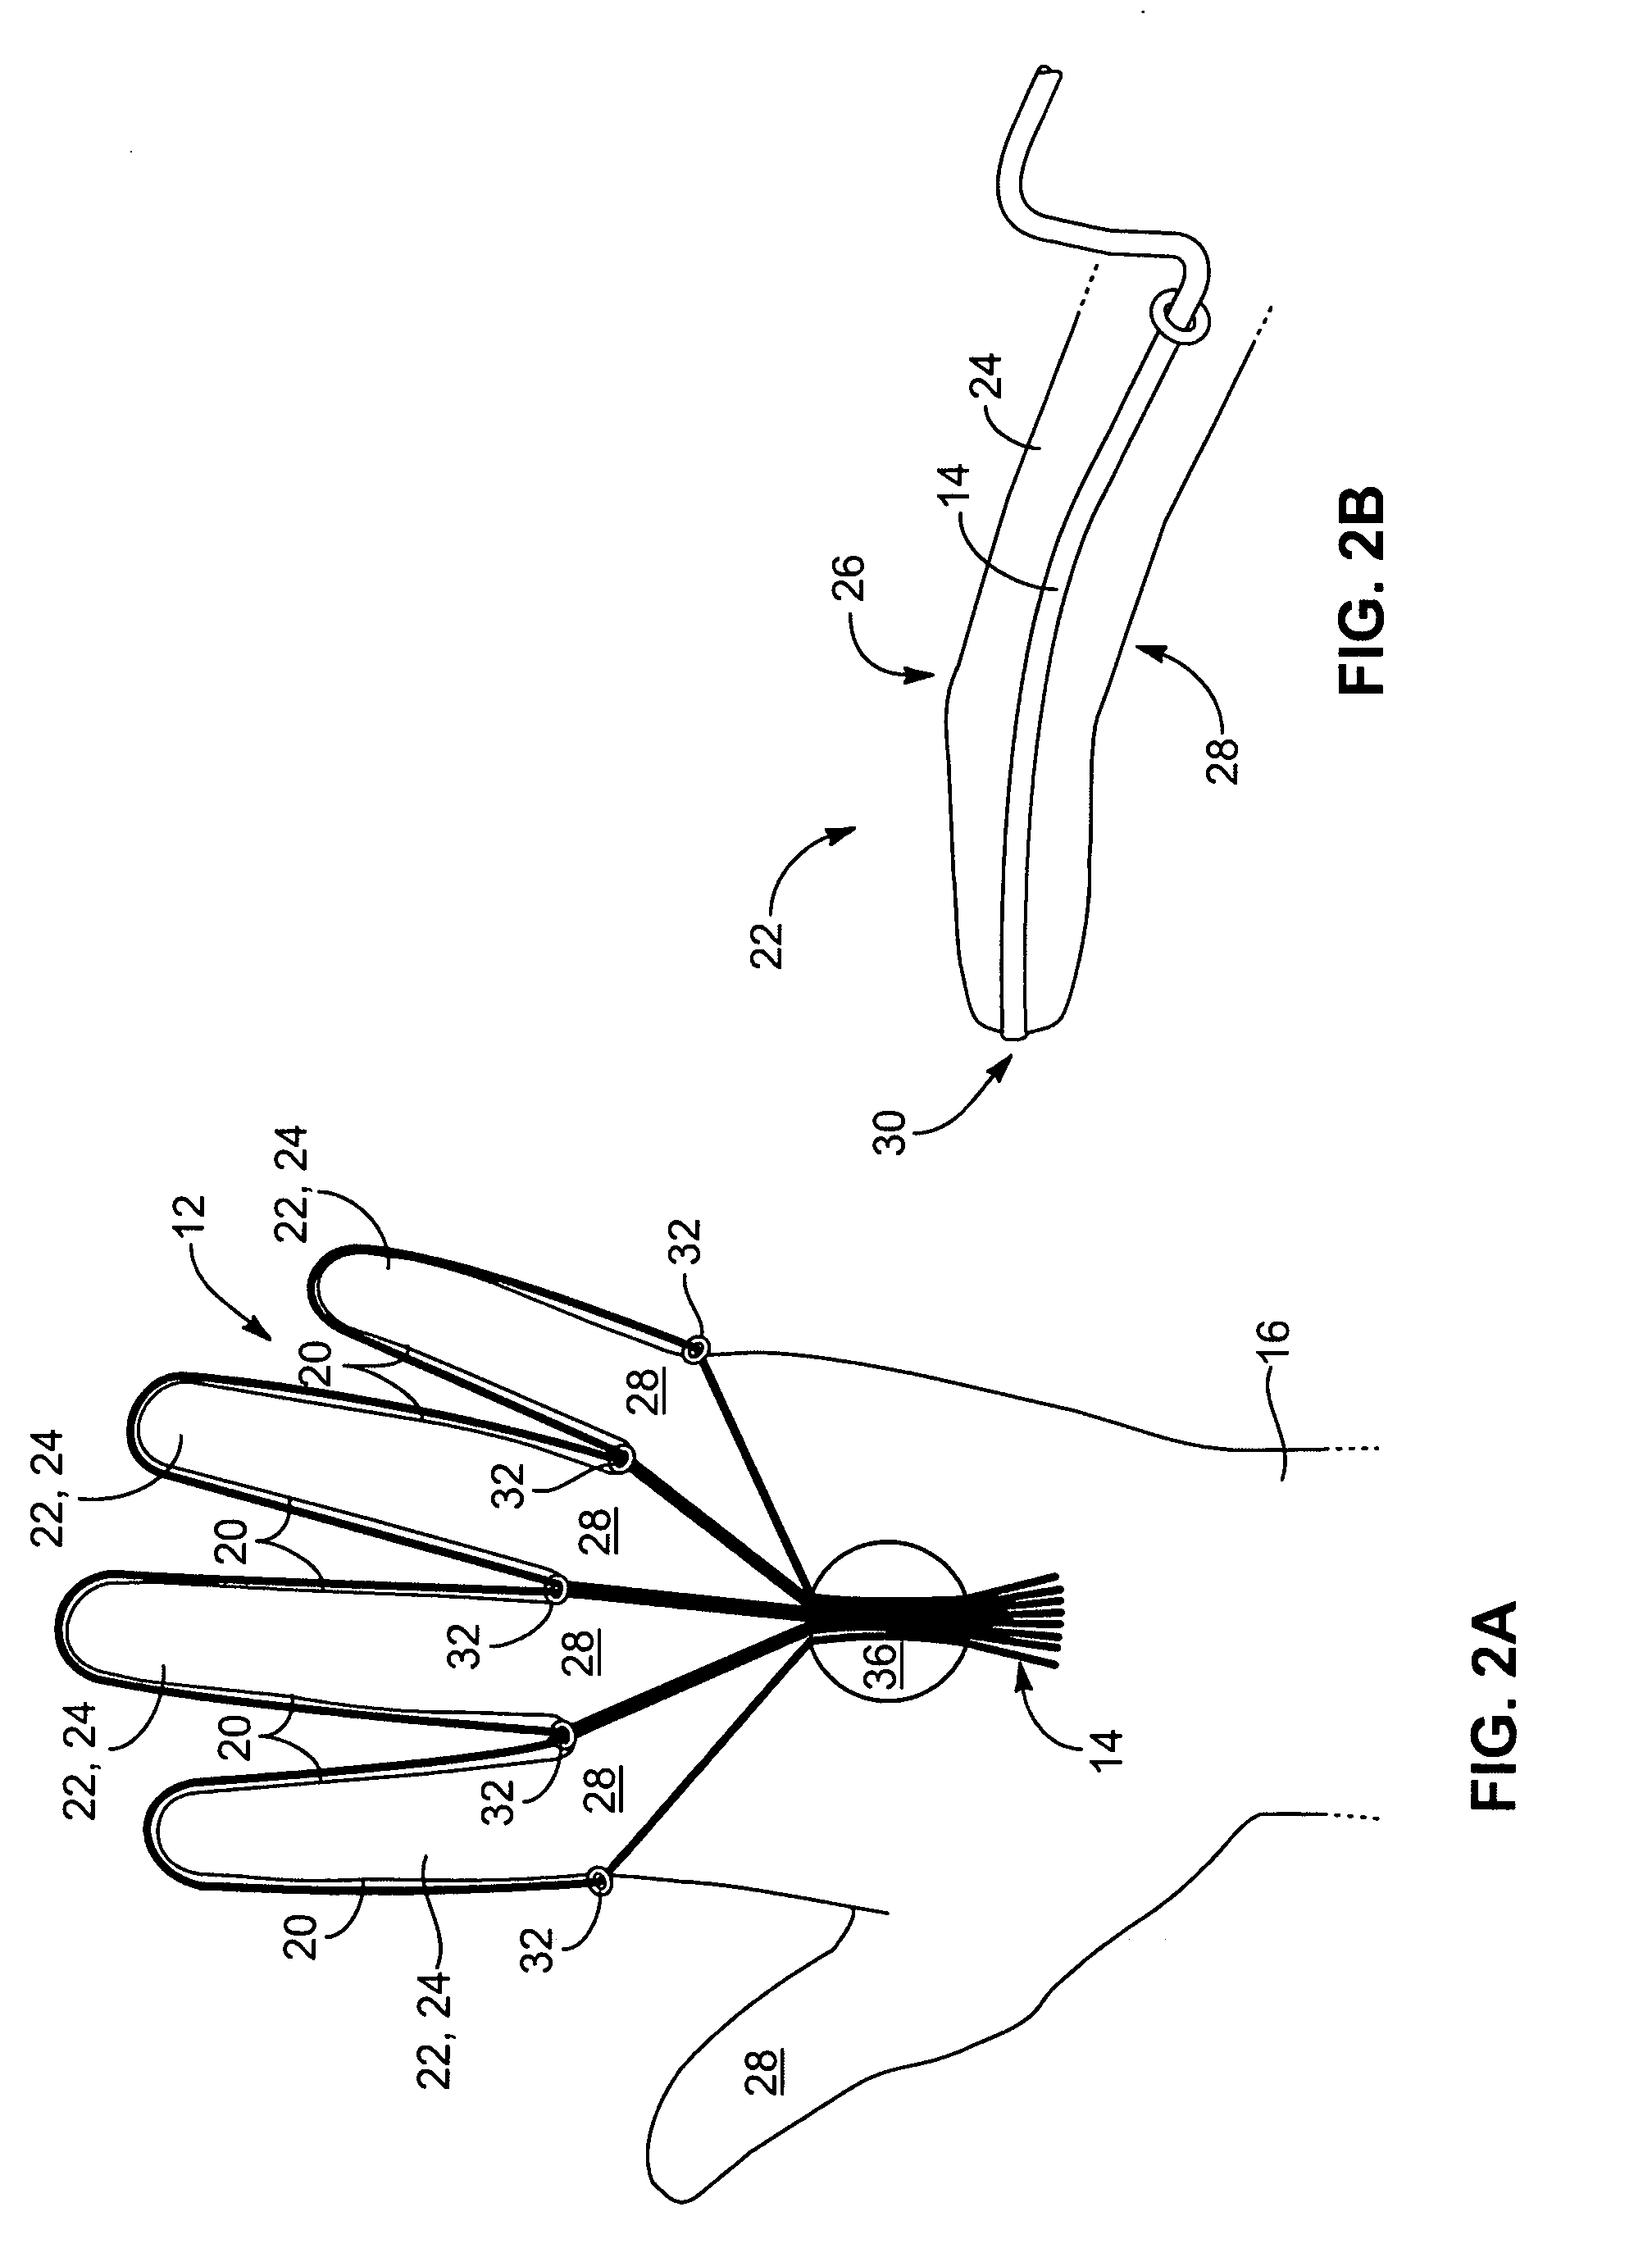 Grip enhancing glove and method for maintaining a grip that enables a user to maintain a prolonged grip without incurring undesirable effects